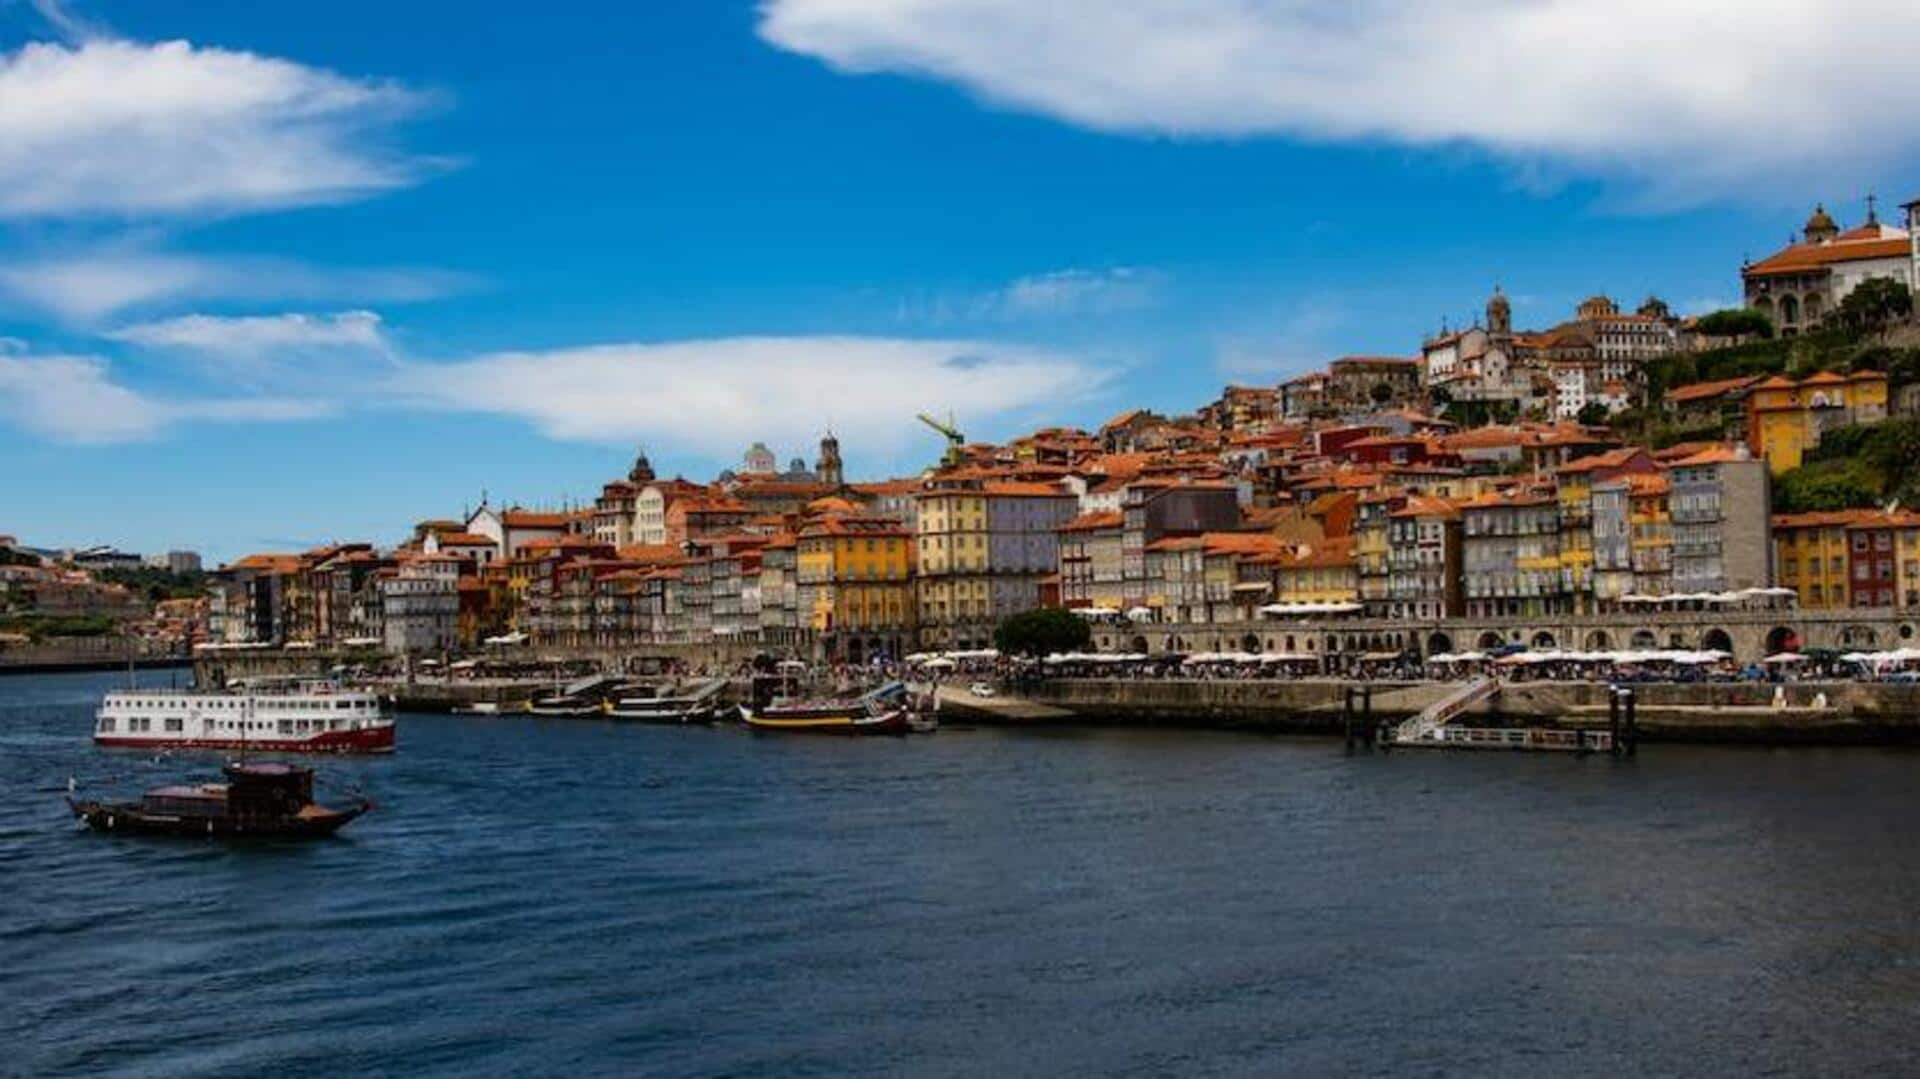 Explore Portugal's fun side with these offbeat attractions